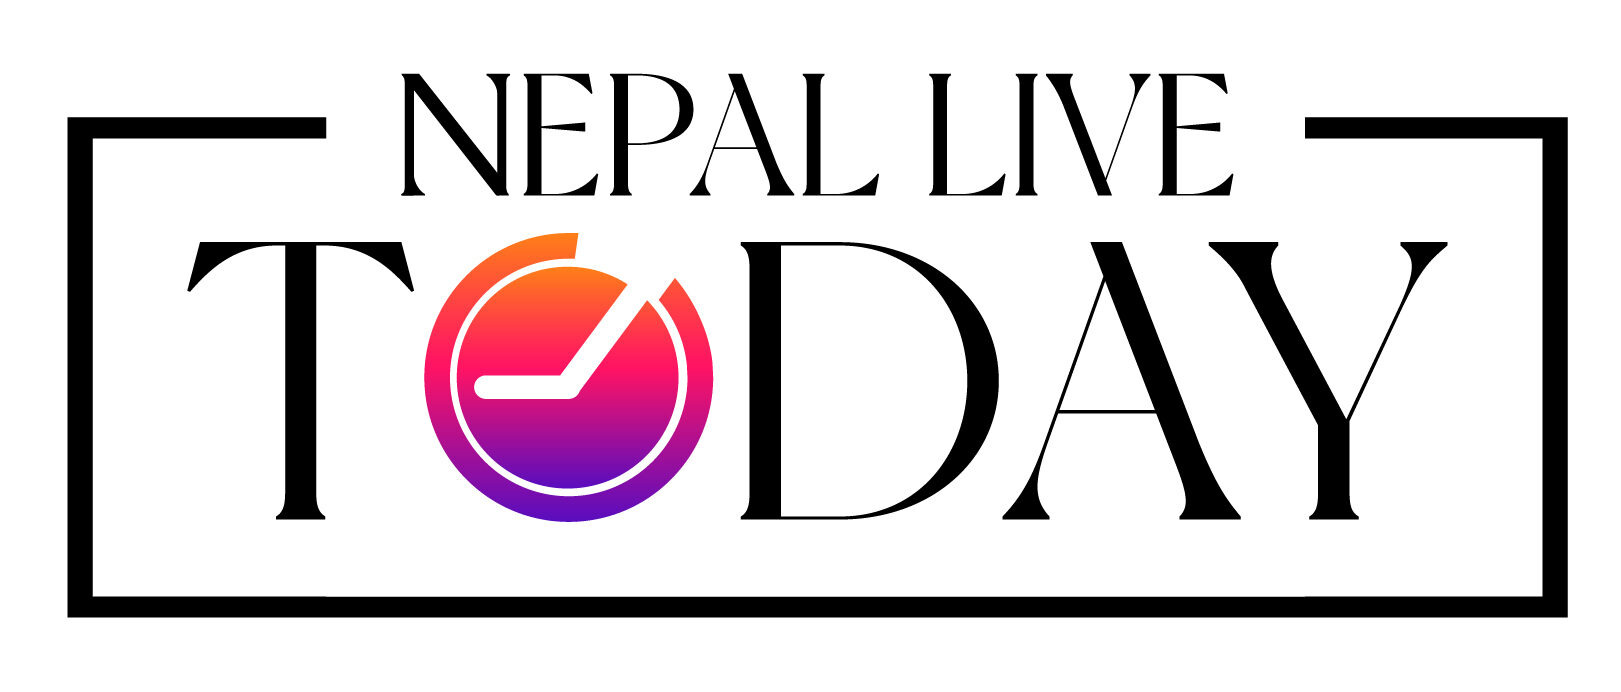 Nepal Live Today